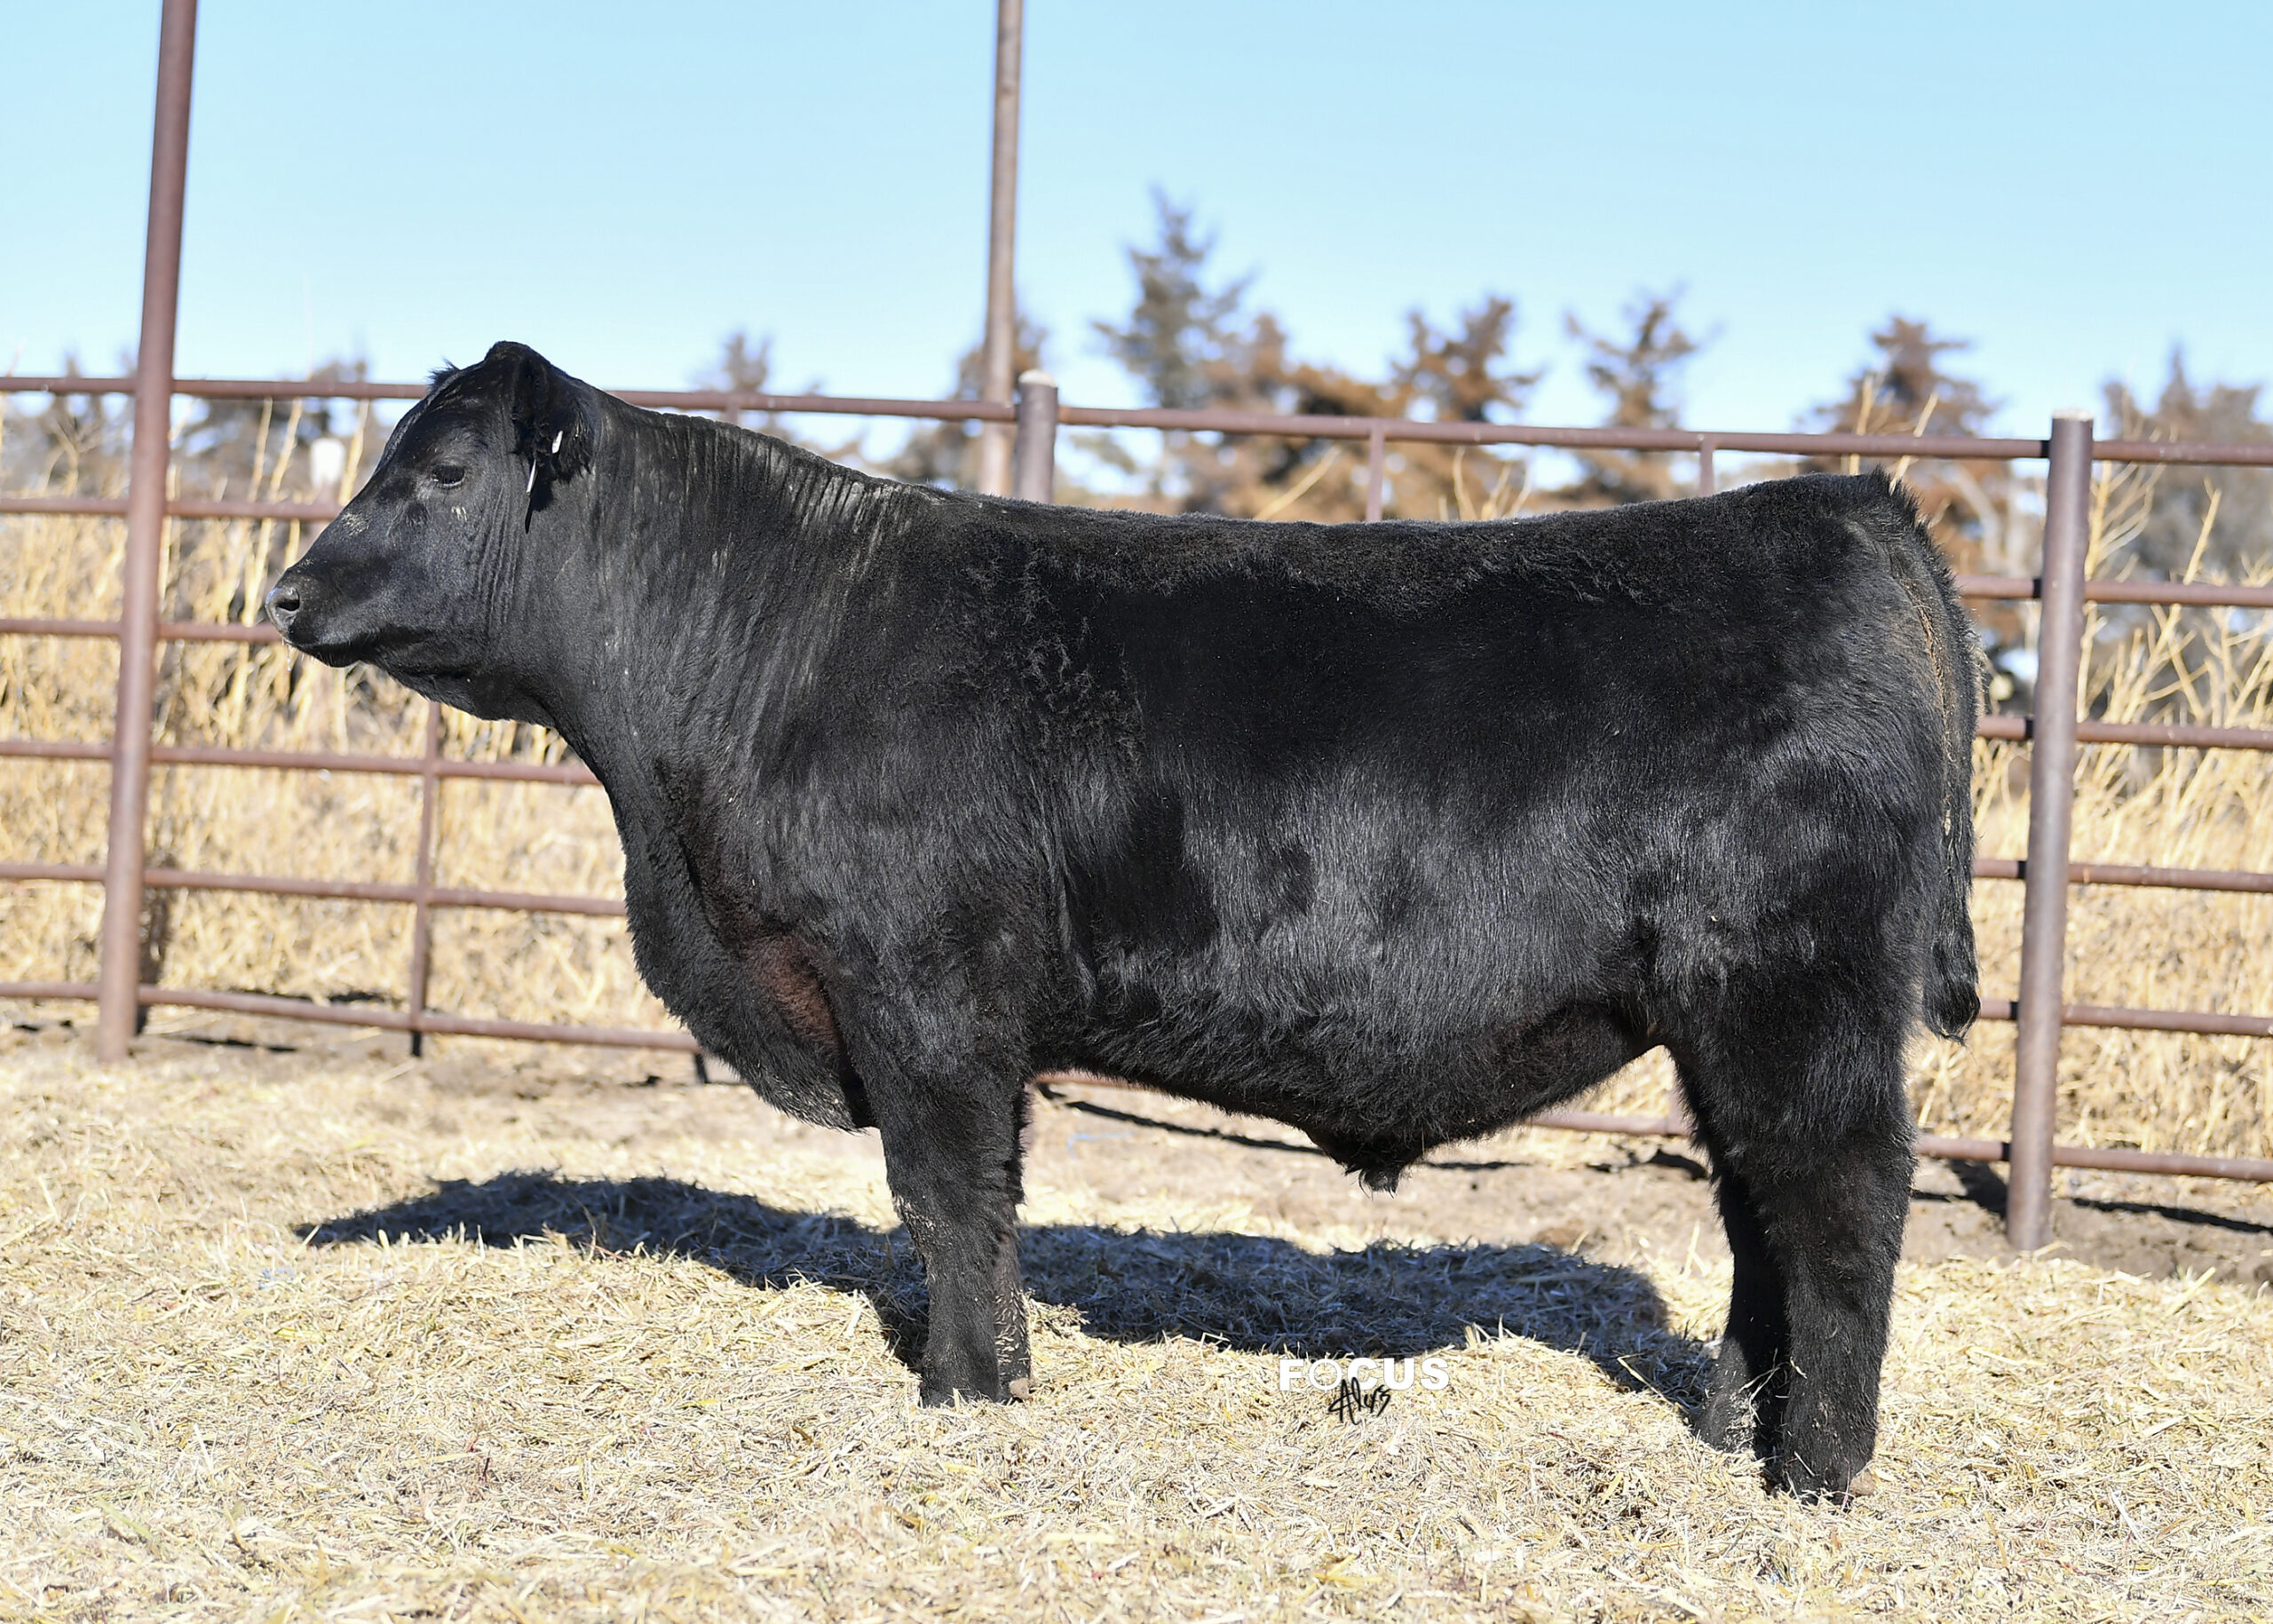 Tag# 109, Ficken Angus, SandPoint J Edger Hoover